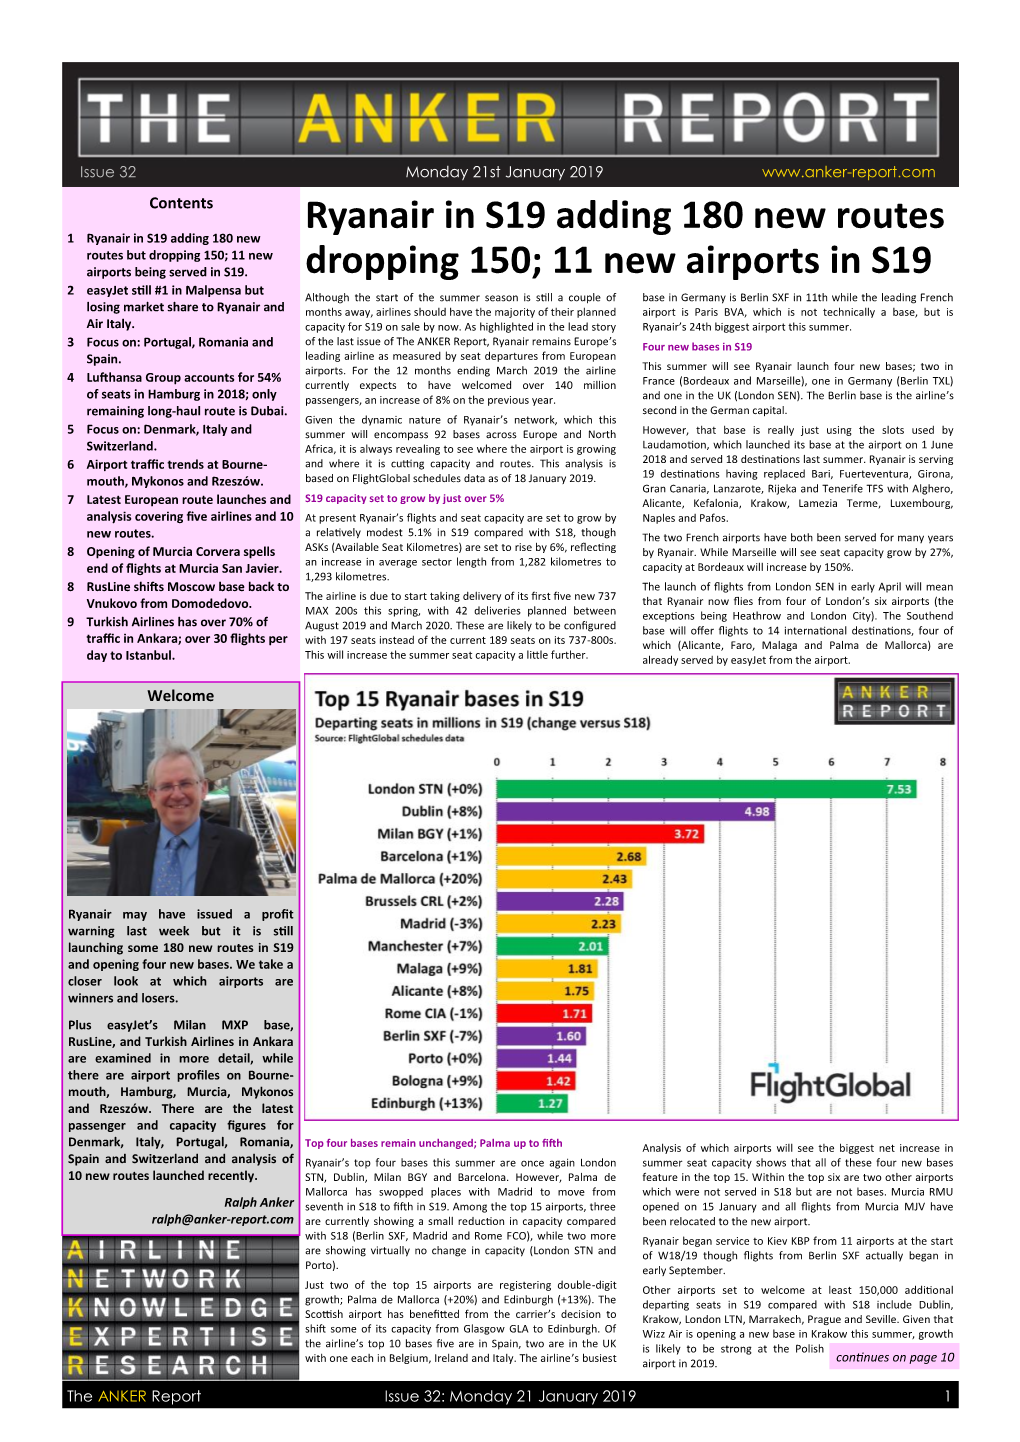 Ryanair in S19 Adding 180 New Routes Dropping 150; 11 New Airports In